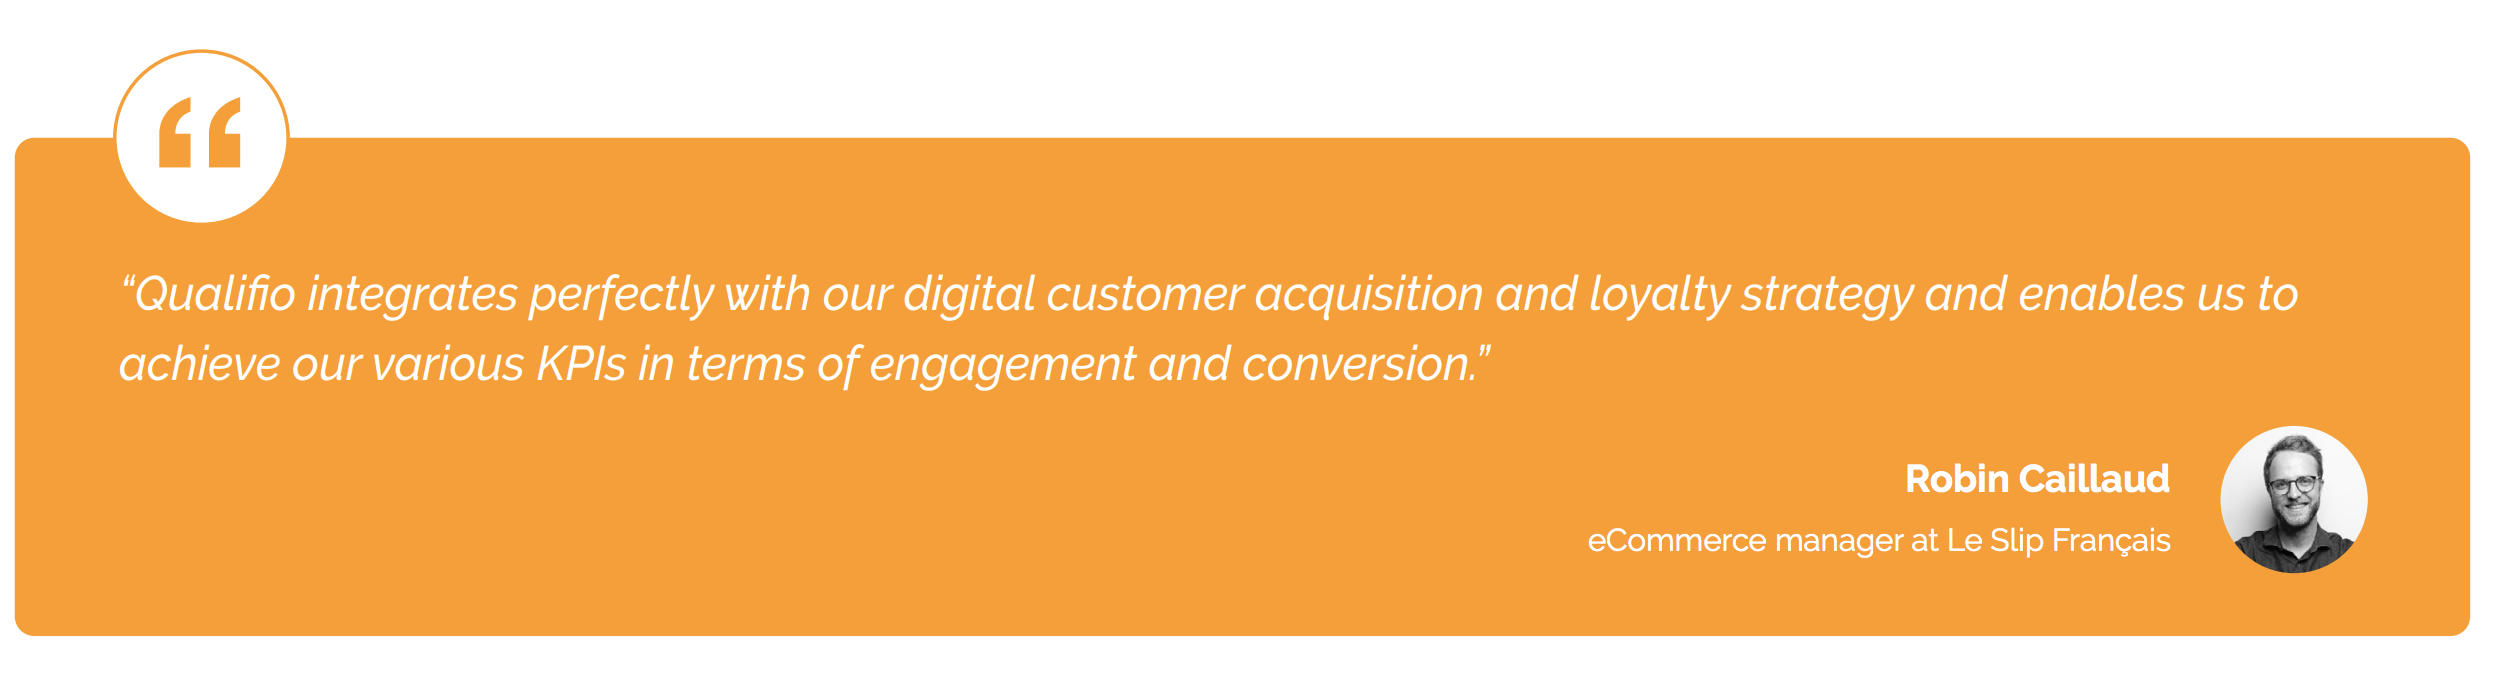 customer-engagement-acquisition-knowledge-le-slip-francais-digital-strategy-robin-caillaud